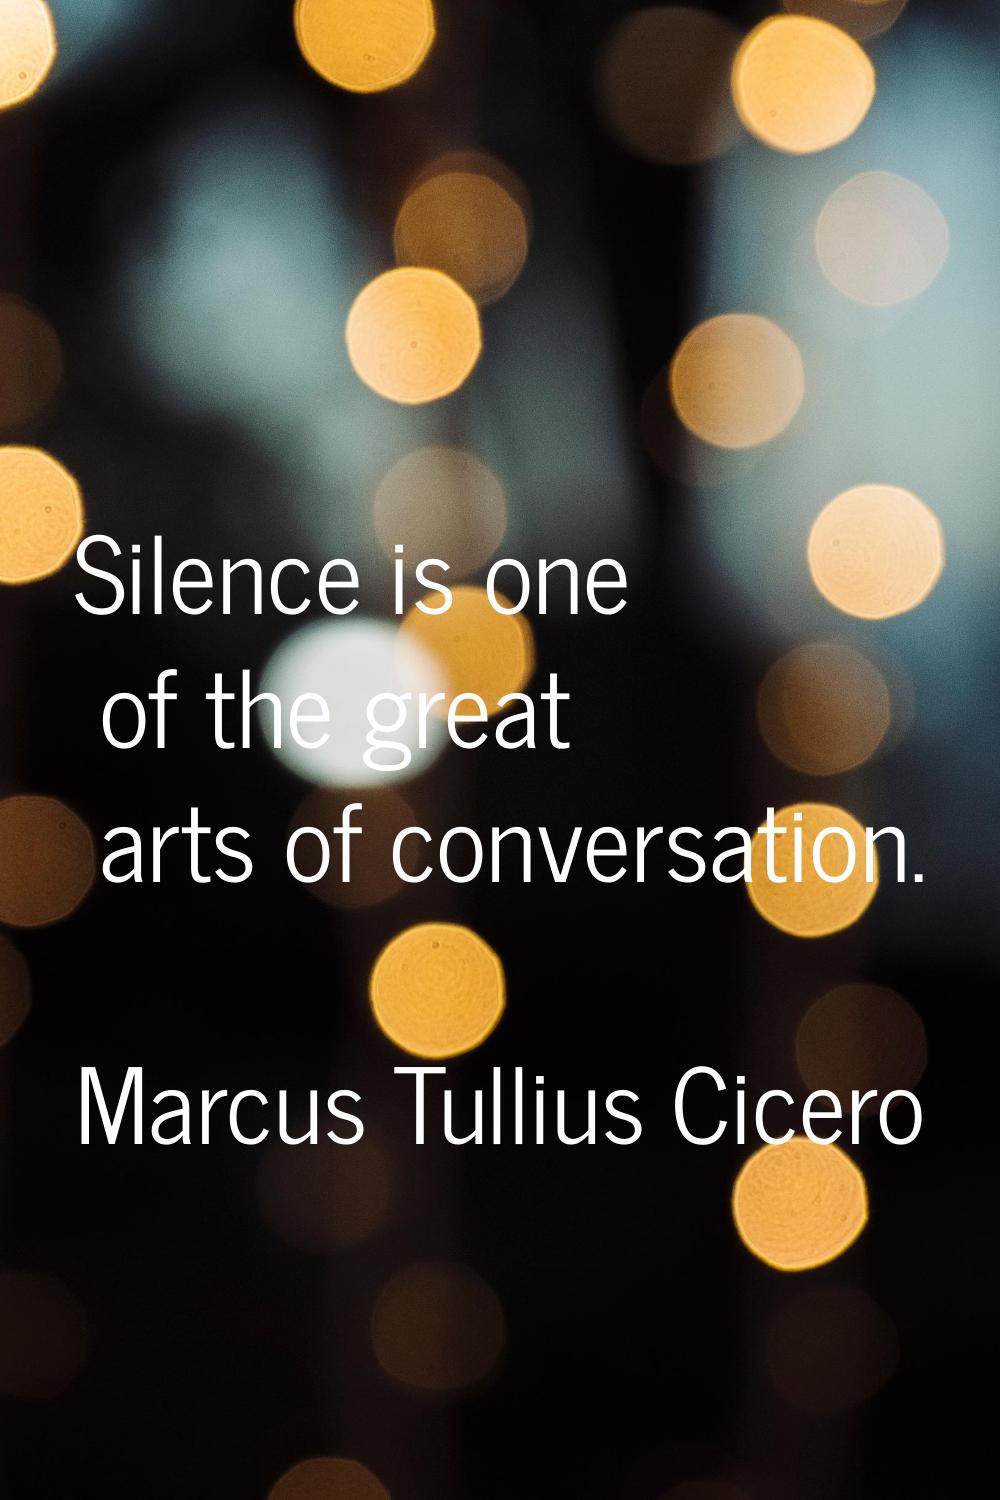 Silence is one of the great arts of conversation.